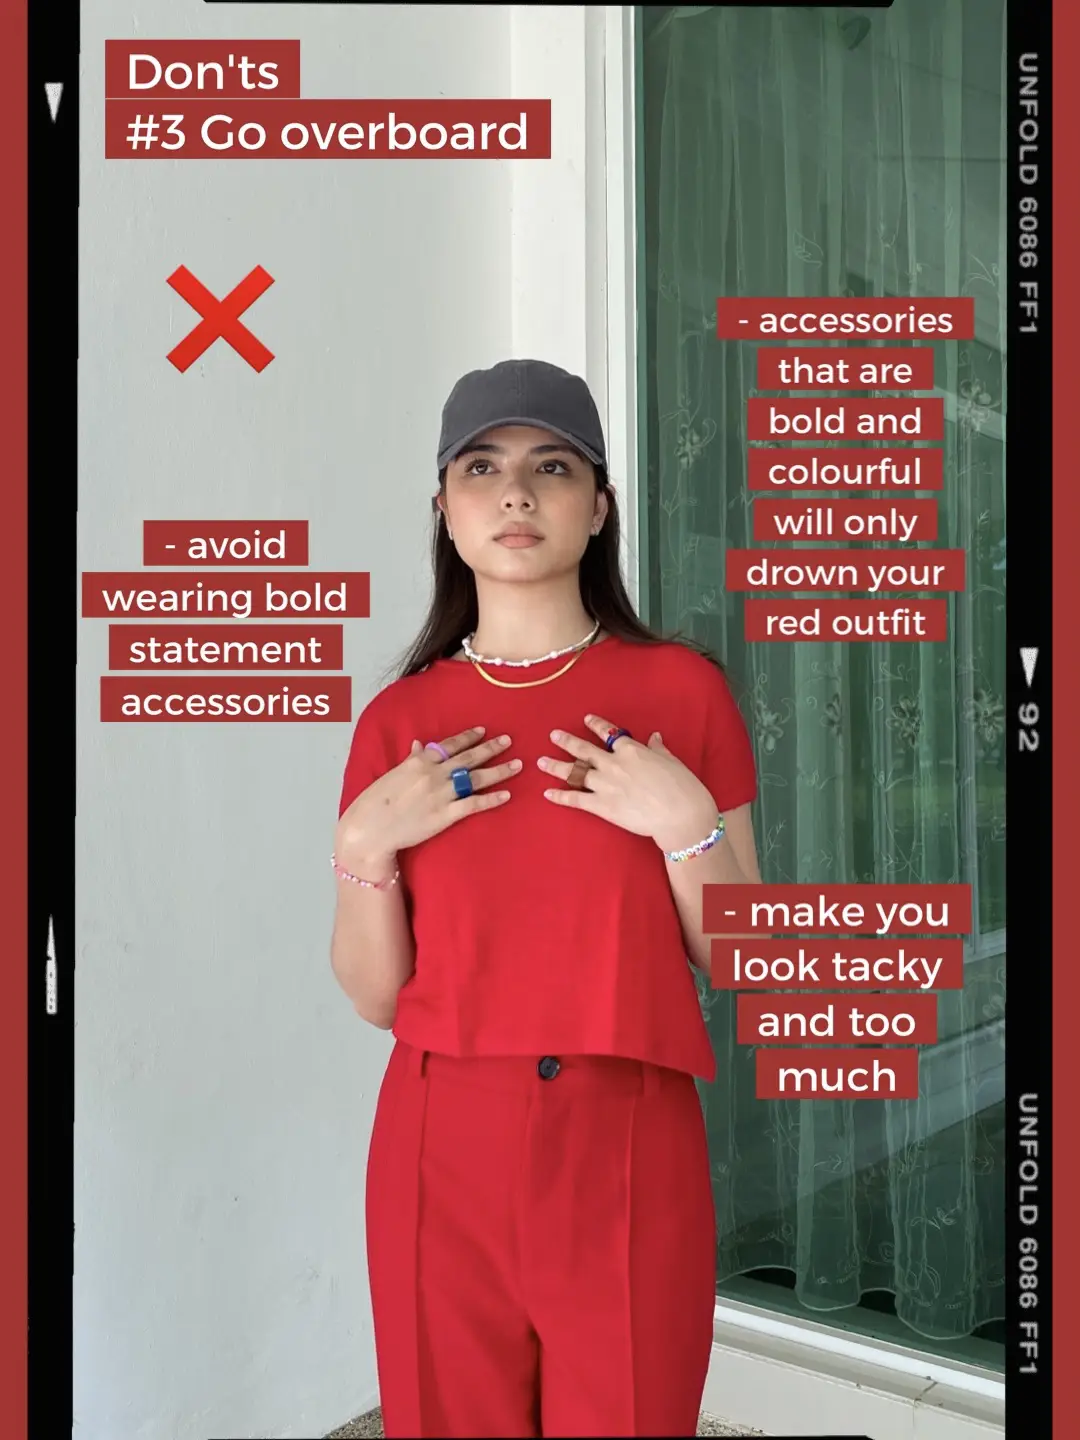 The right way to style red outfits!, Galeri disiarkan oleh Faznadia